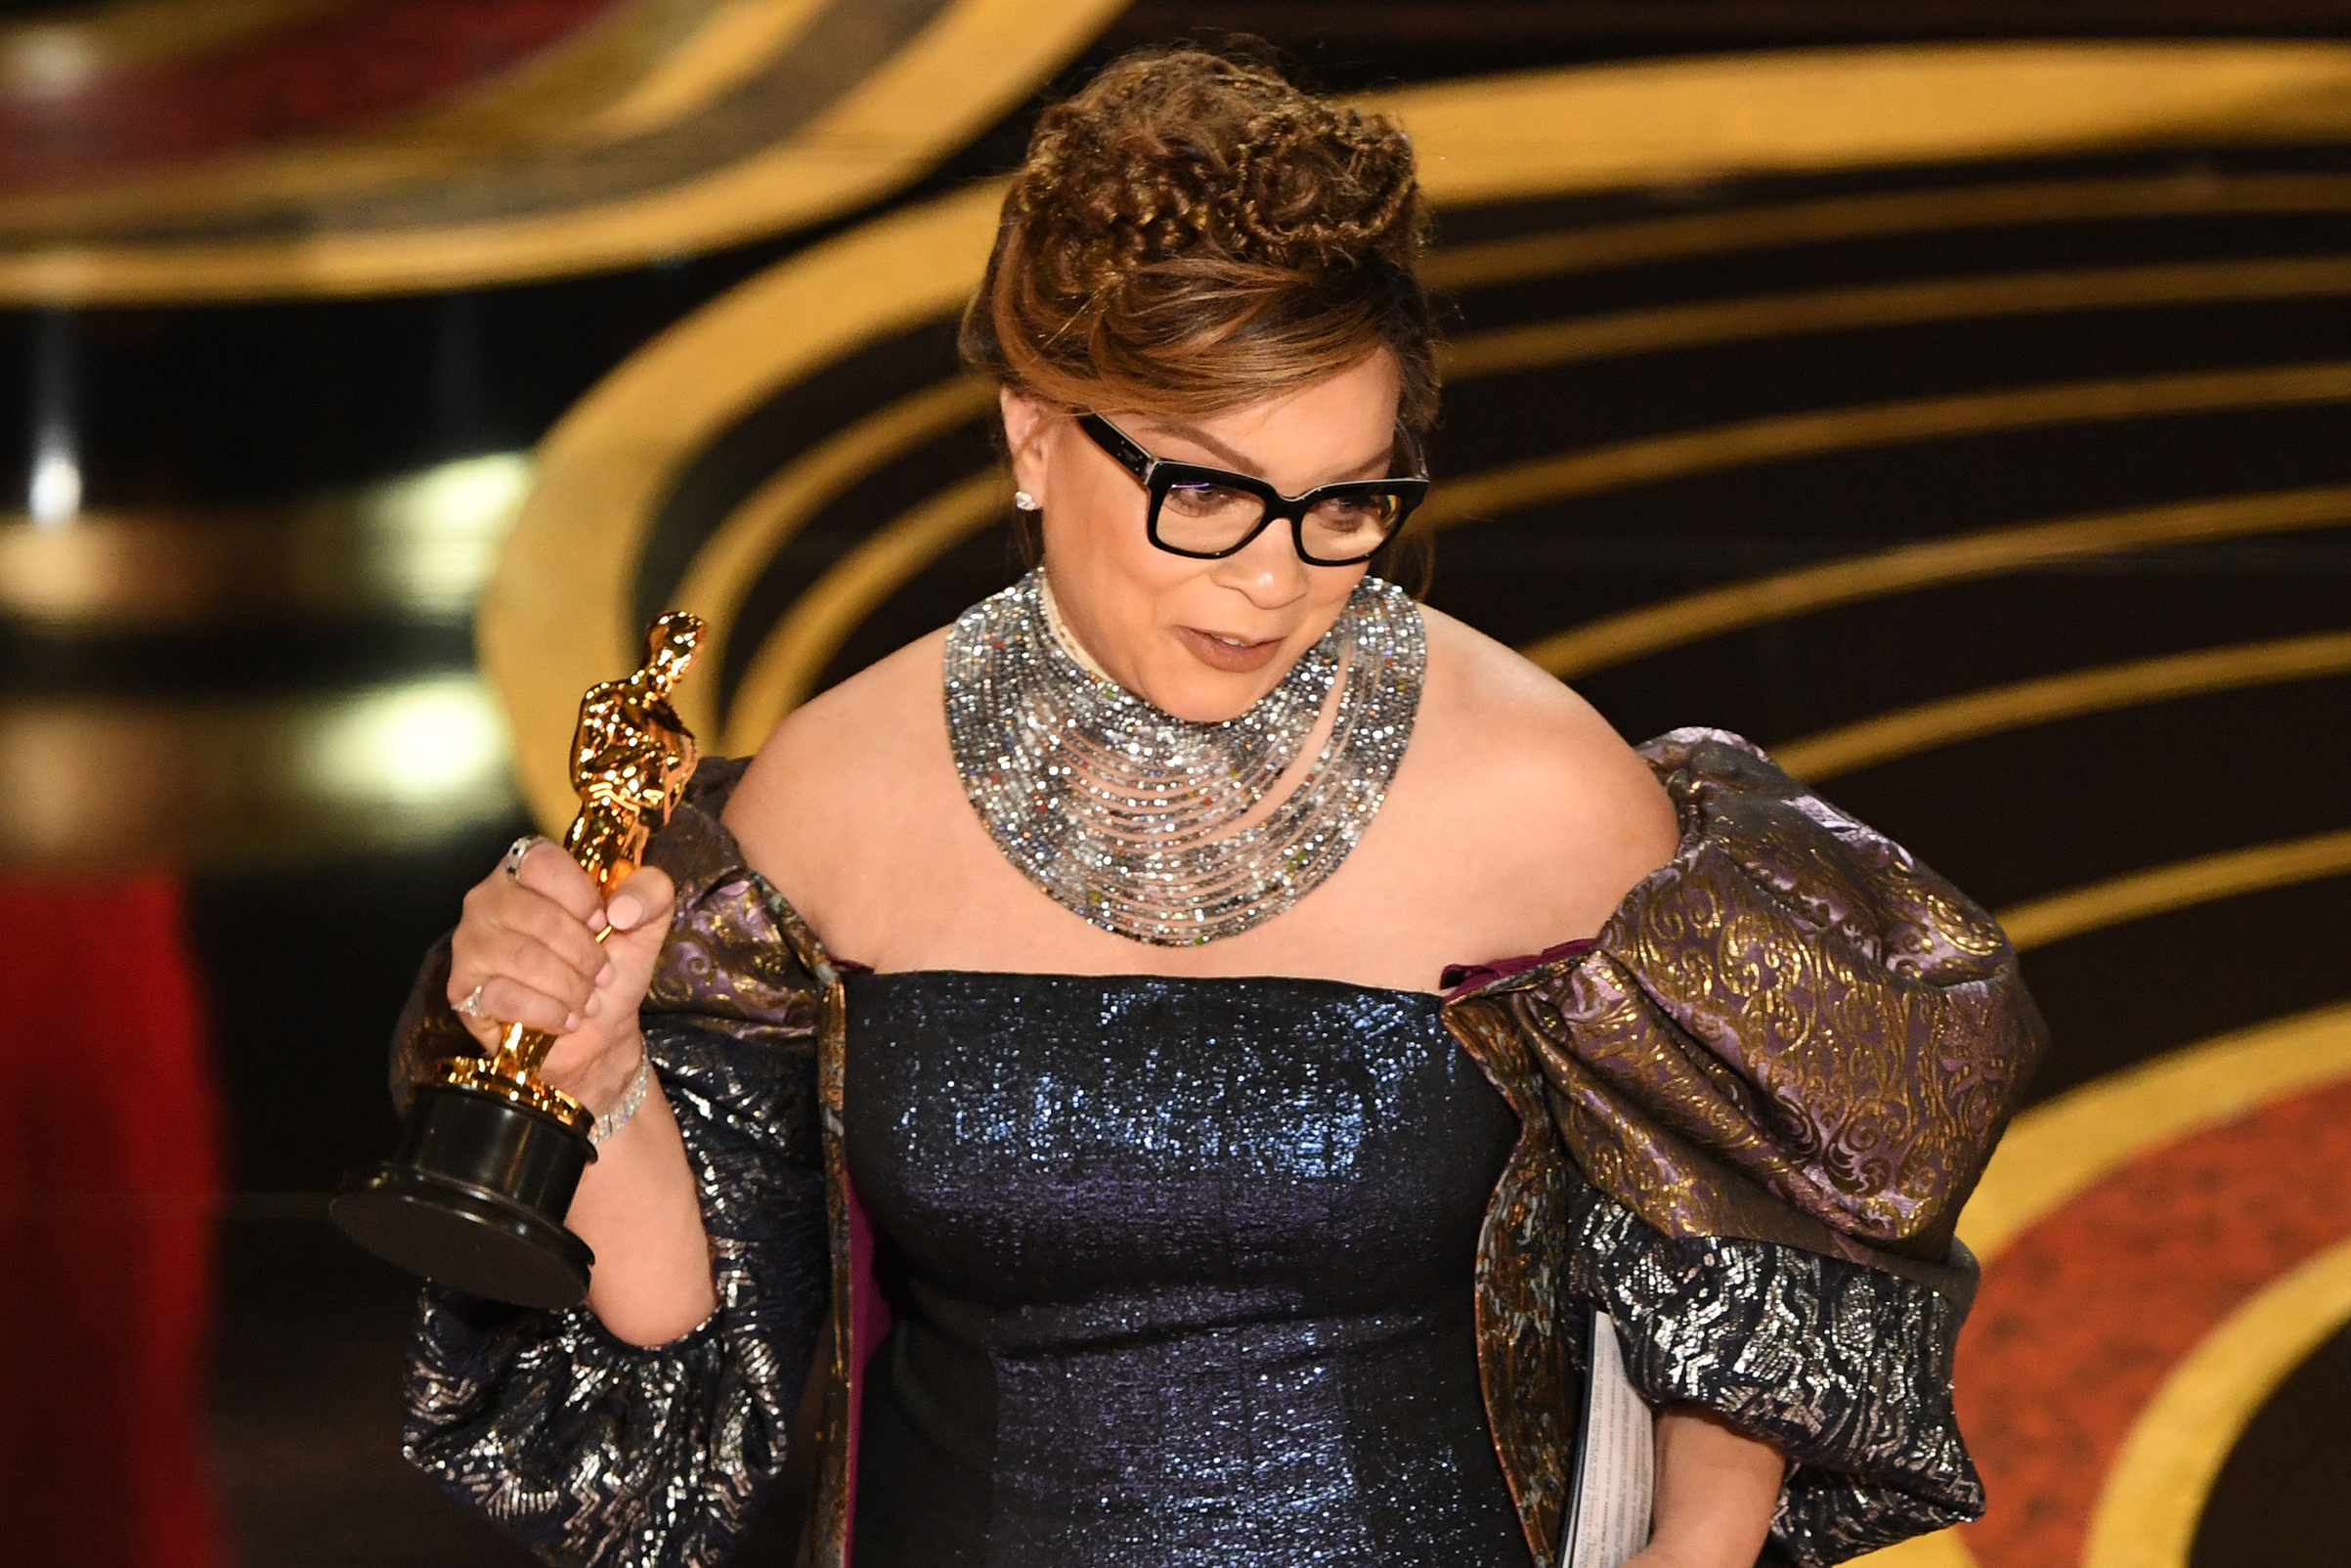 Best Costume Design nominee for "Black Panther" Ruth E. Carter accepts her Oscar during the 91st Annual Academy Awards at the Dolby Theatre in Hollywood on Feb. 24, 2019. (Valerie Macon—AFP/Getty Images)